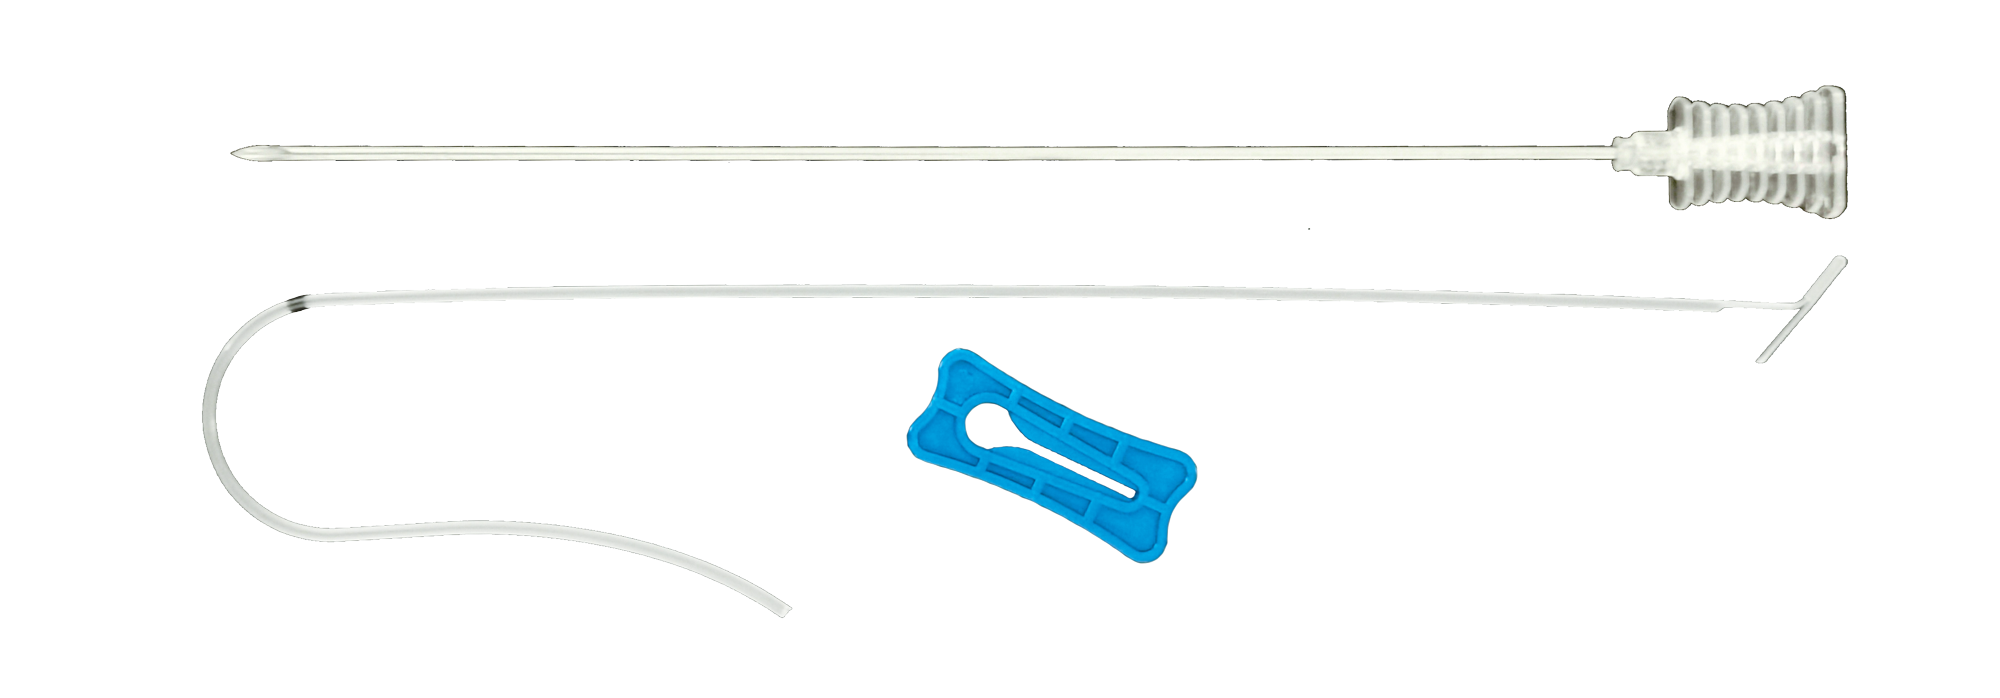 Disposable Tissue Biopsy Needle Holder